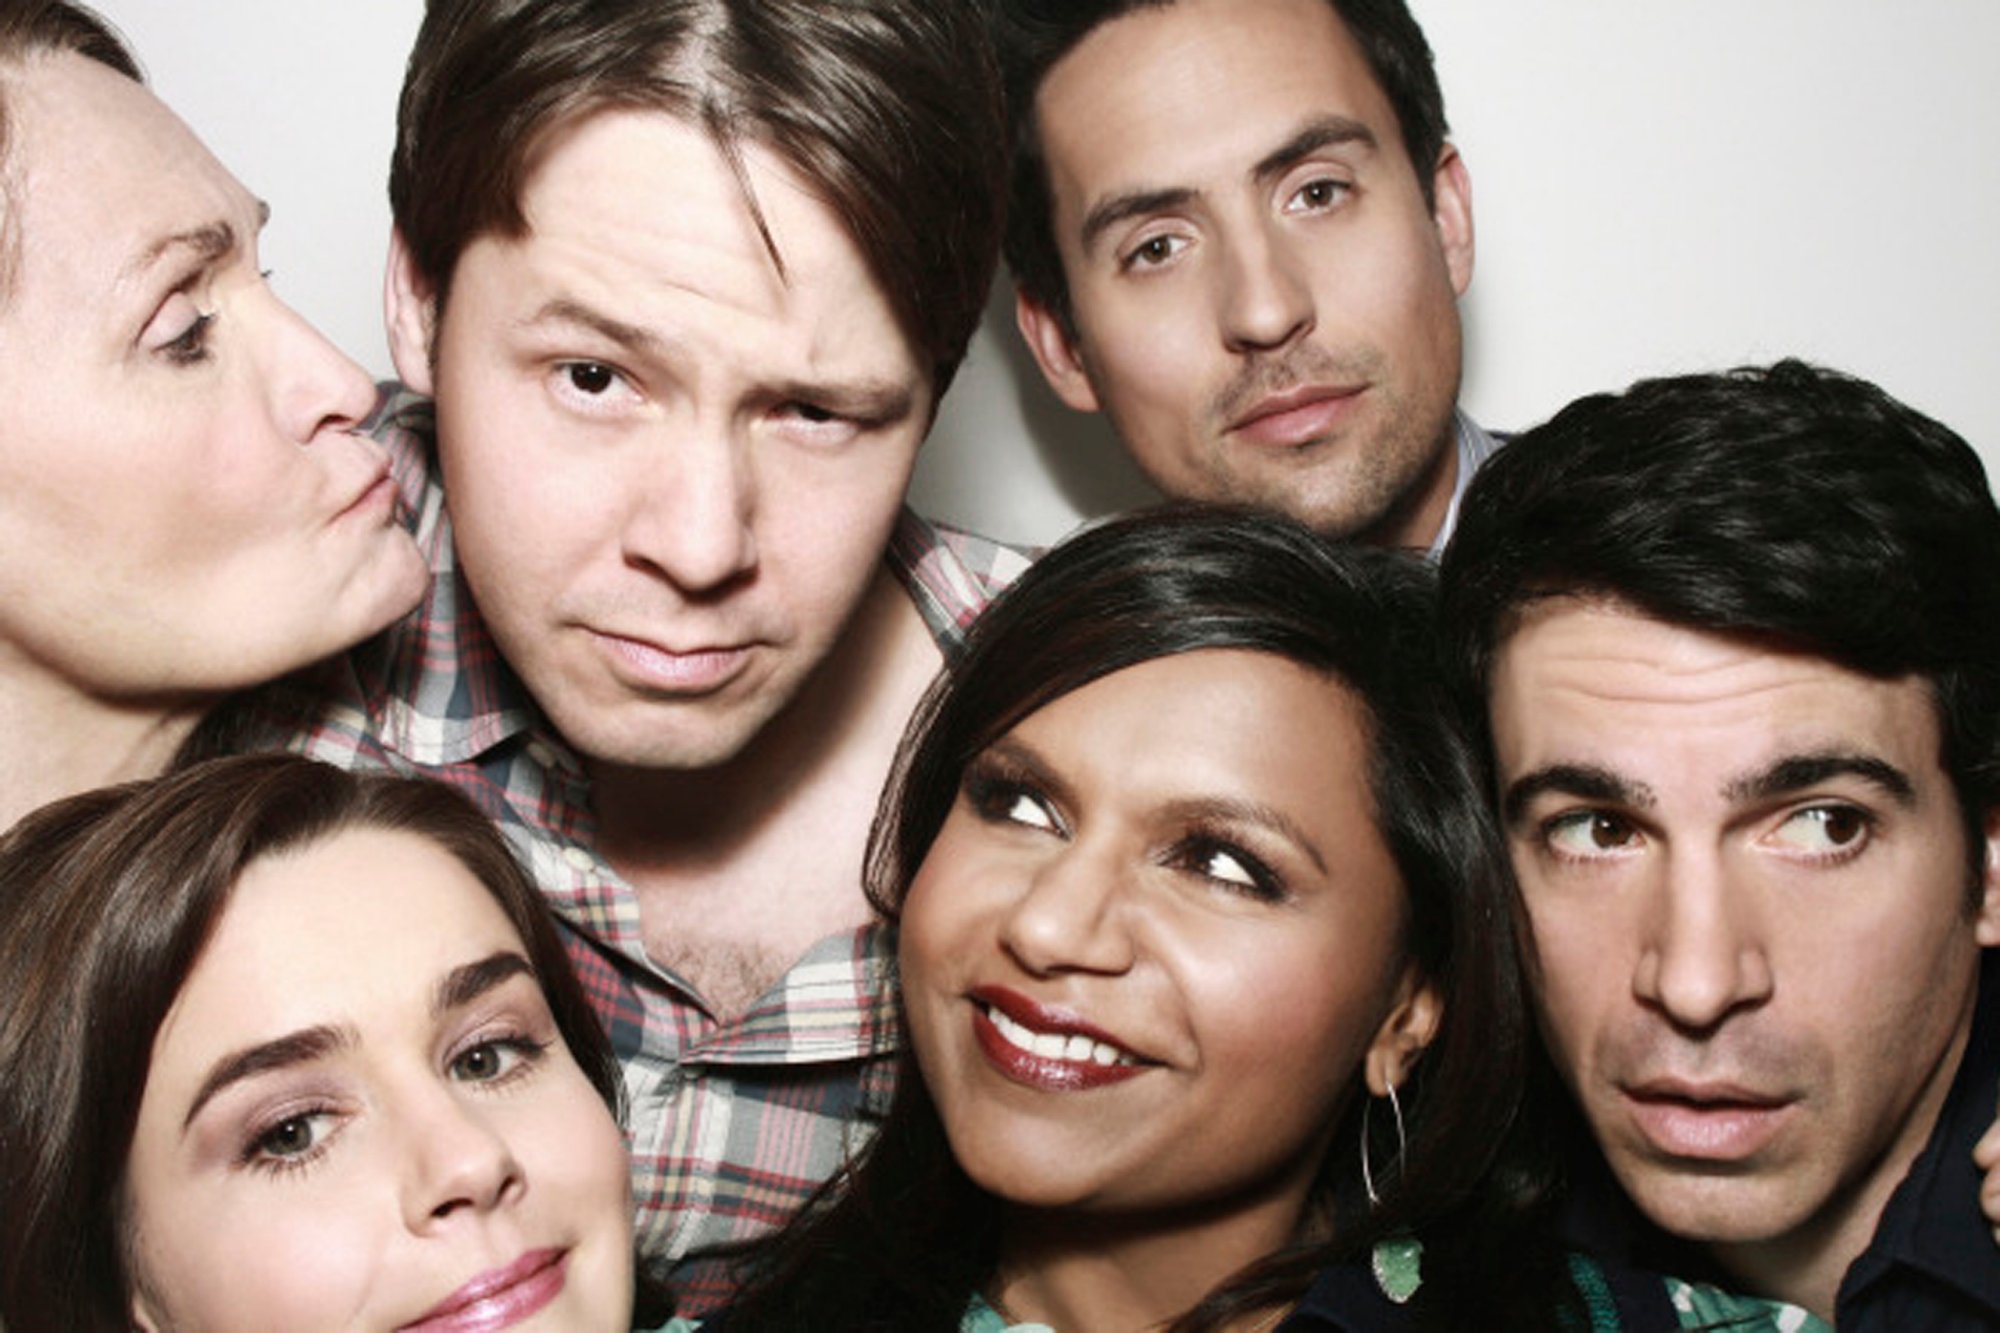 ‘the mindy project’ makes controversial joke about consent